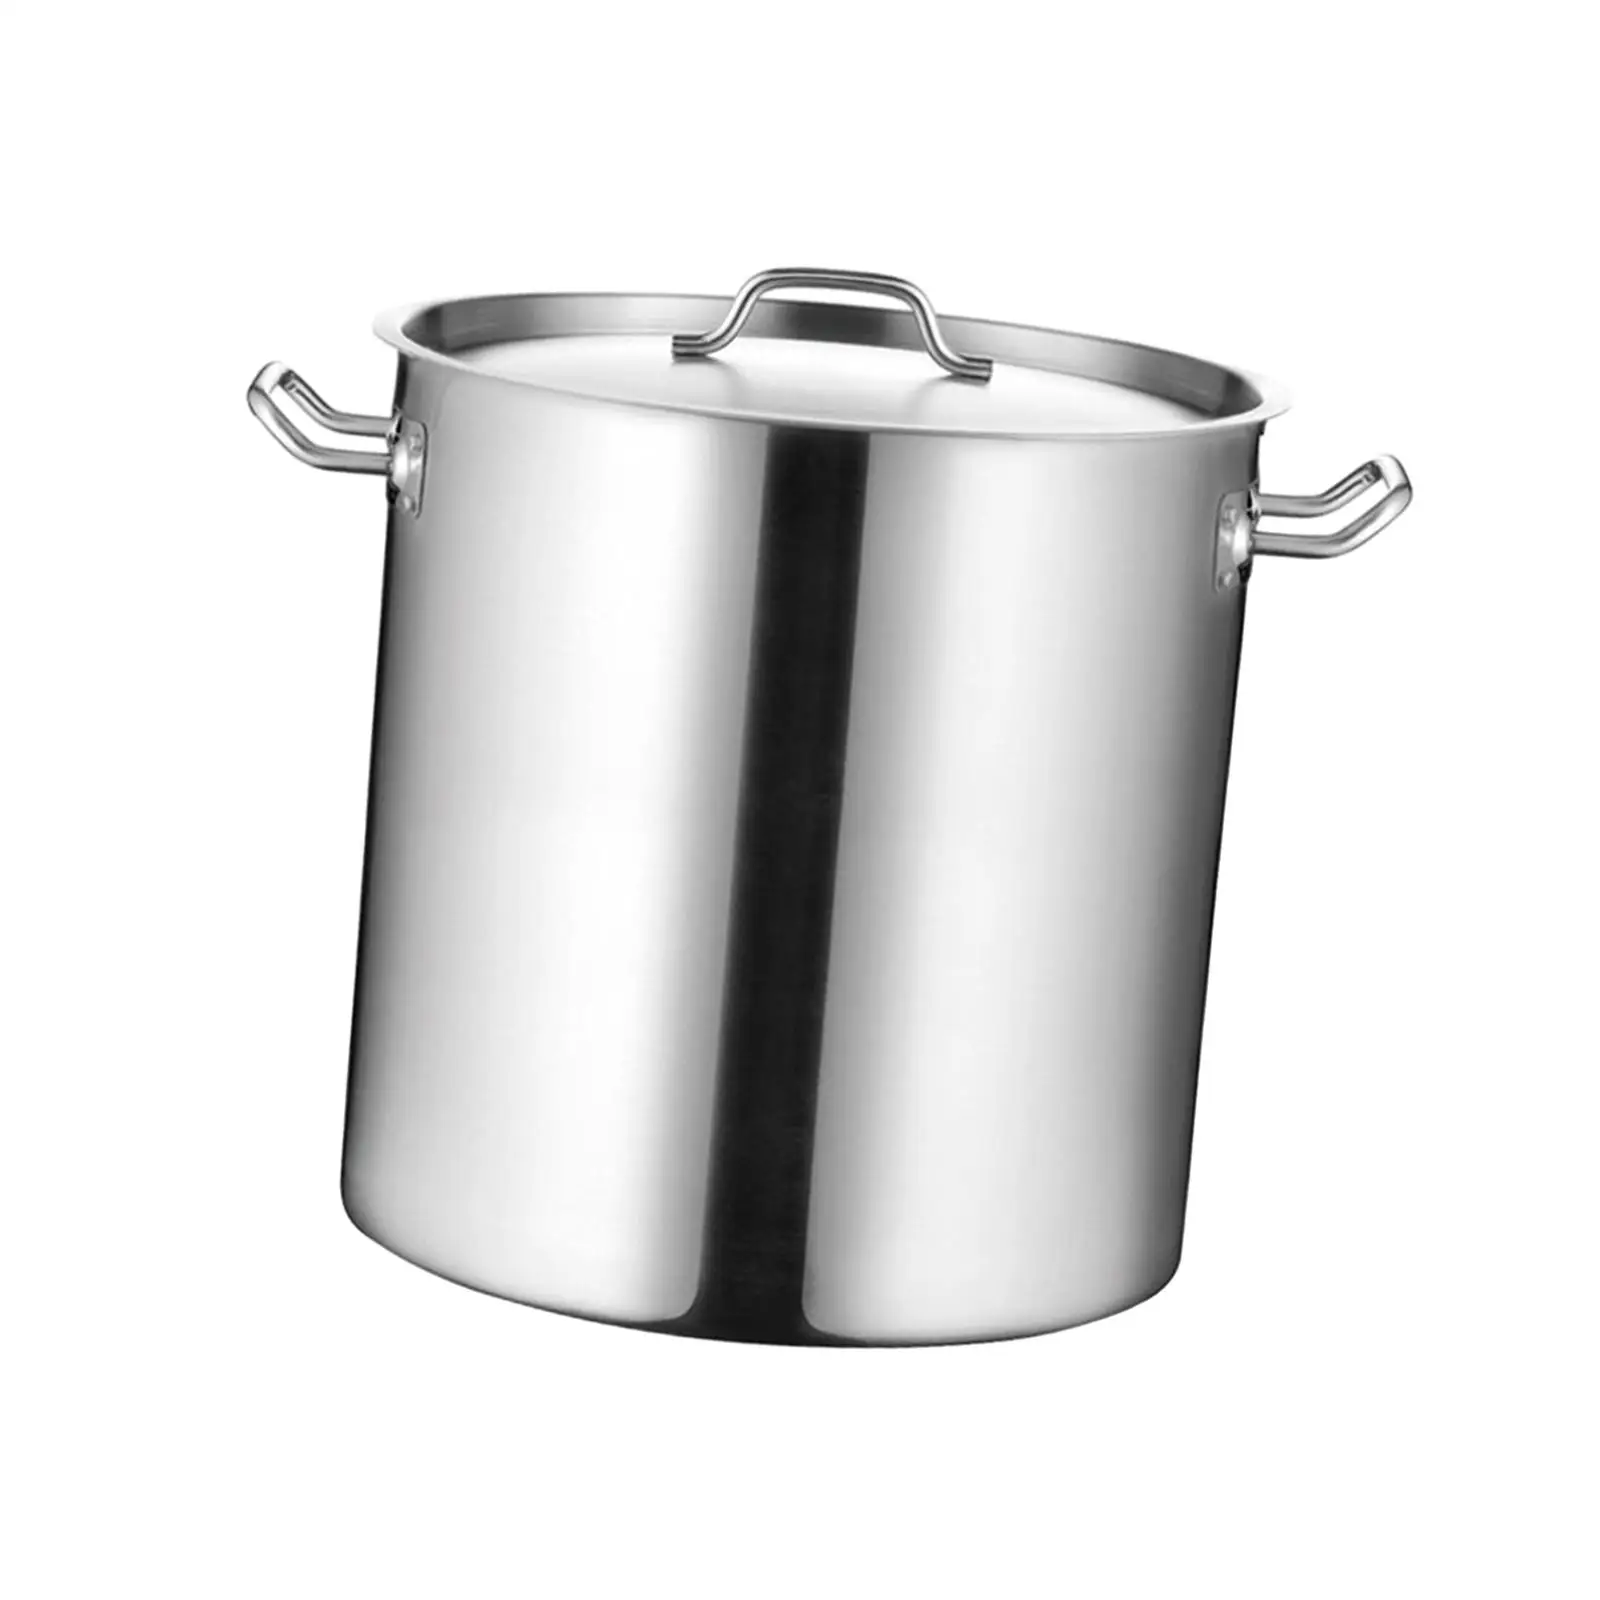 Stockpot Stainless Steel Soup Pot Multipurpose Cookware Boiling Double Handle 6L Soup Boiling Pan for Hotel Kitchen Household 2